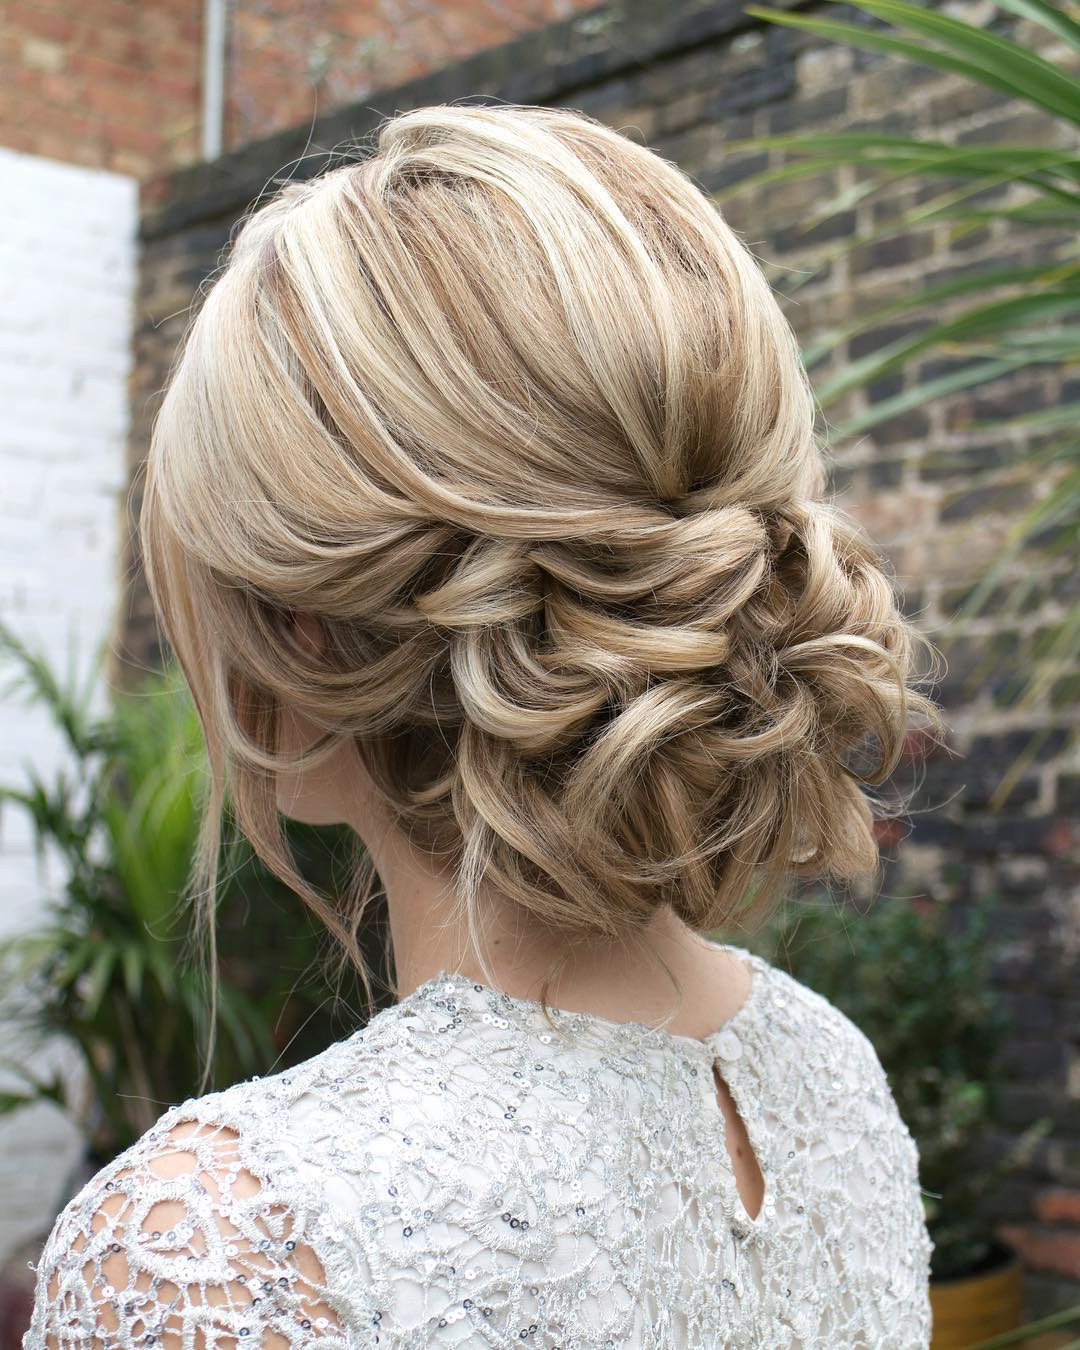 Easy Prom Hairstyles Updos
 10 Gorgeous Prom Updos for Long Hair Prom Updo Hairstyles